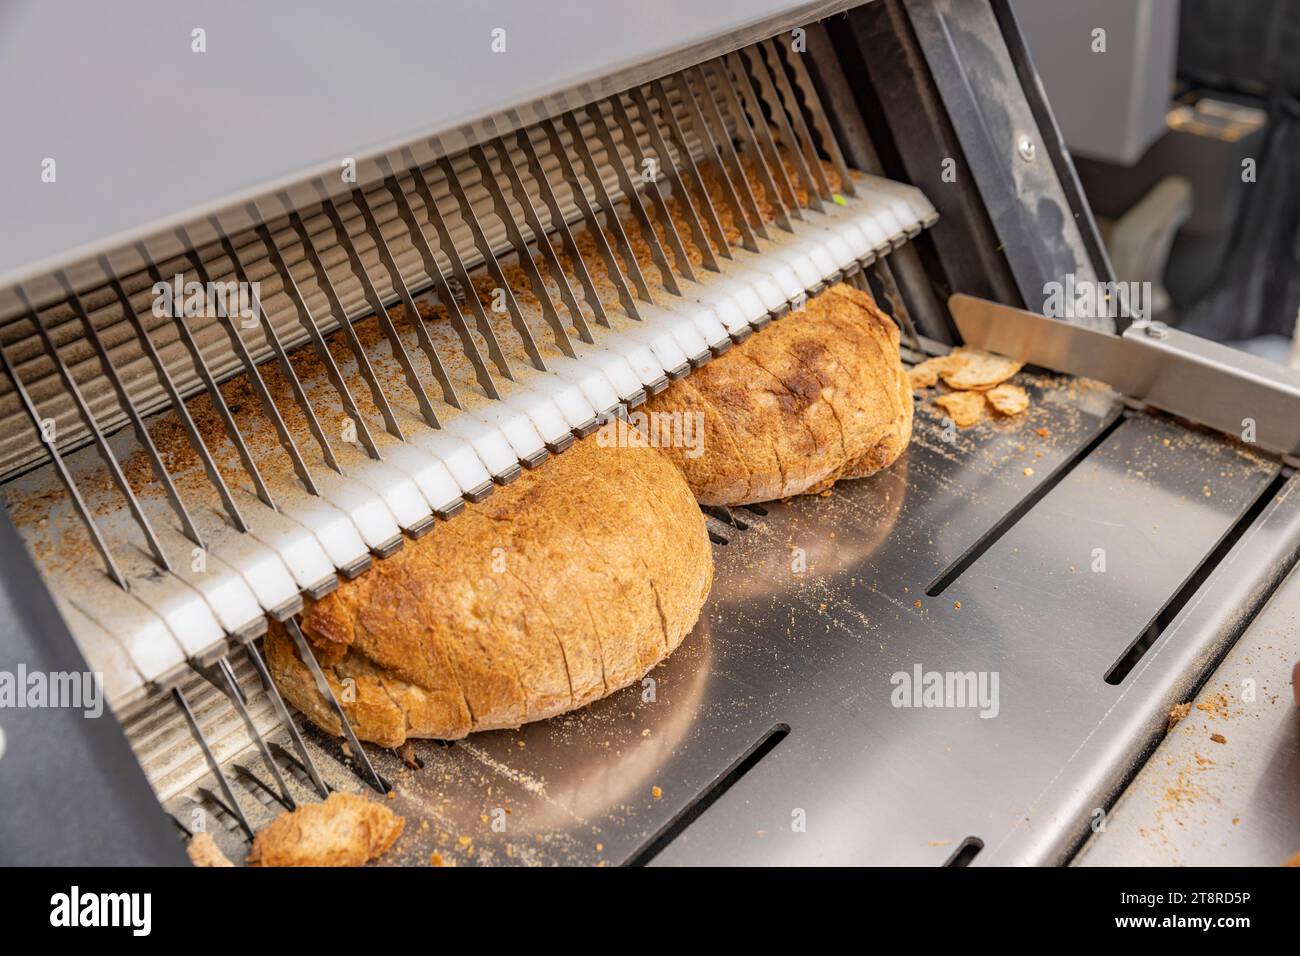 https://c8.alamy.com/comp/2T8RD5P/bread-slicing-machine-sliced-bread-on-the-production-line-of-food-and-bakery-products-2T8RD5P.jpg